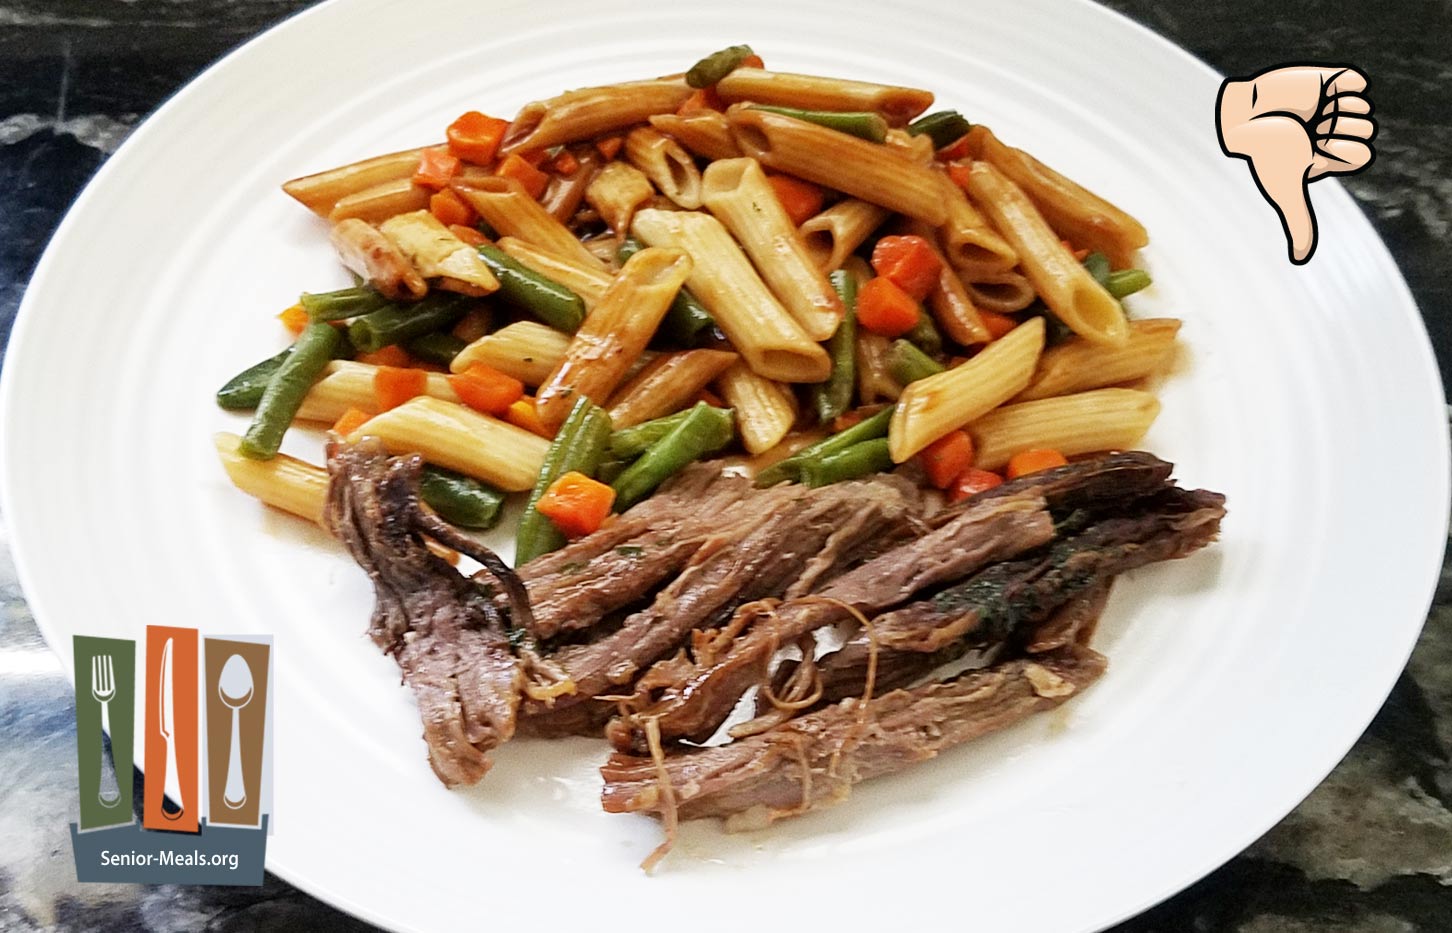 MK Signature Meal - Beef Pot Roast with Red Wine Sauce over Noodles with Carrots & Green Beans  - $13